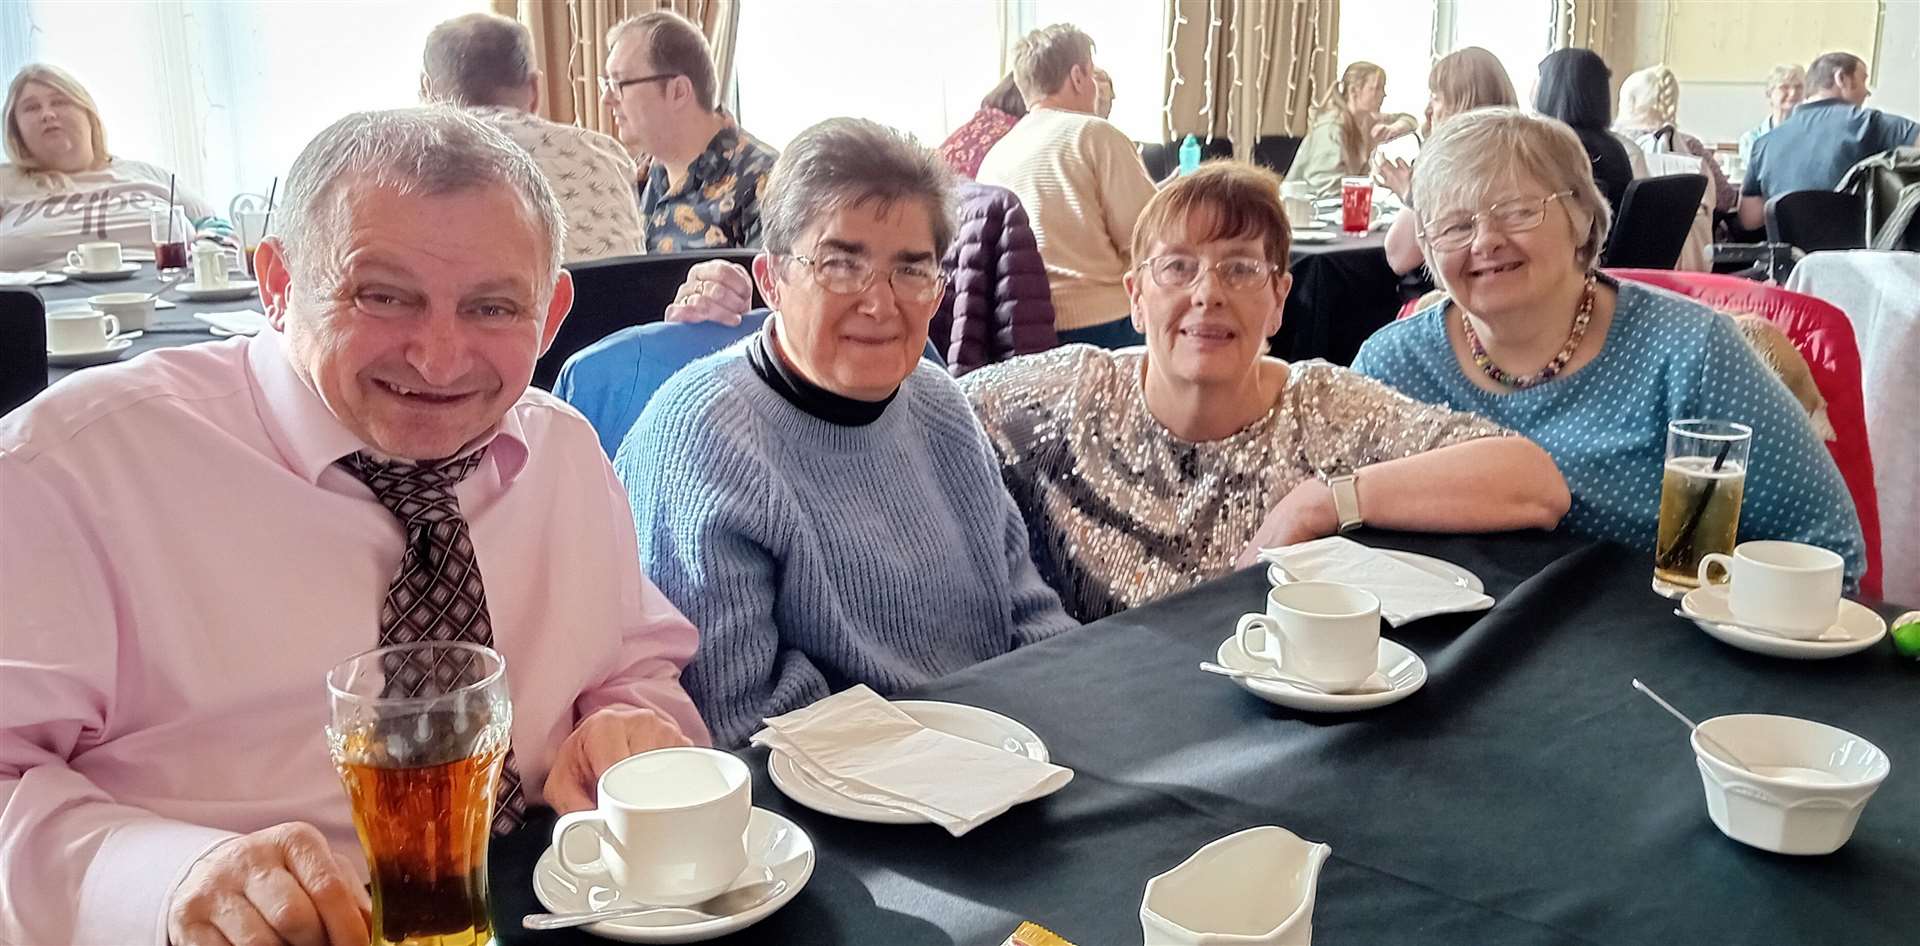 Awaiting a delicious tea are (from left) David Gunn, Susan Cowie, Catherine Mahon and Lorraine MacGregor. Picture: Willie Mackay